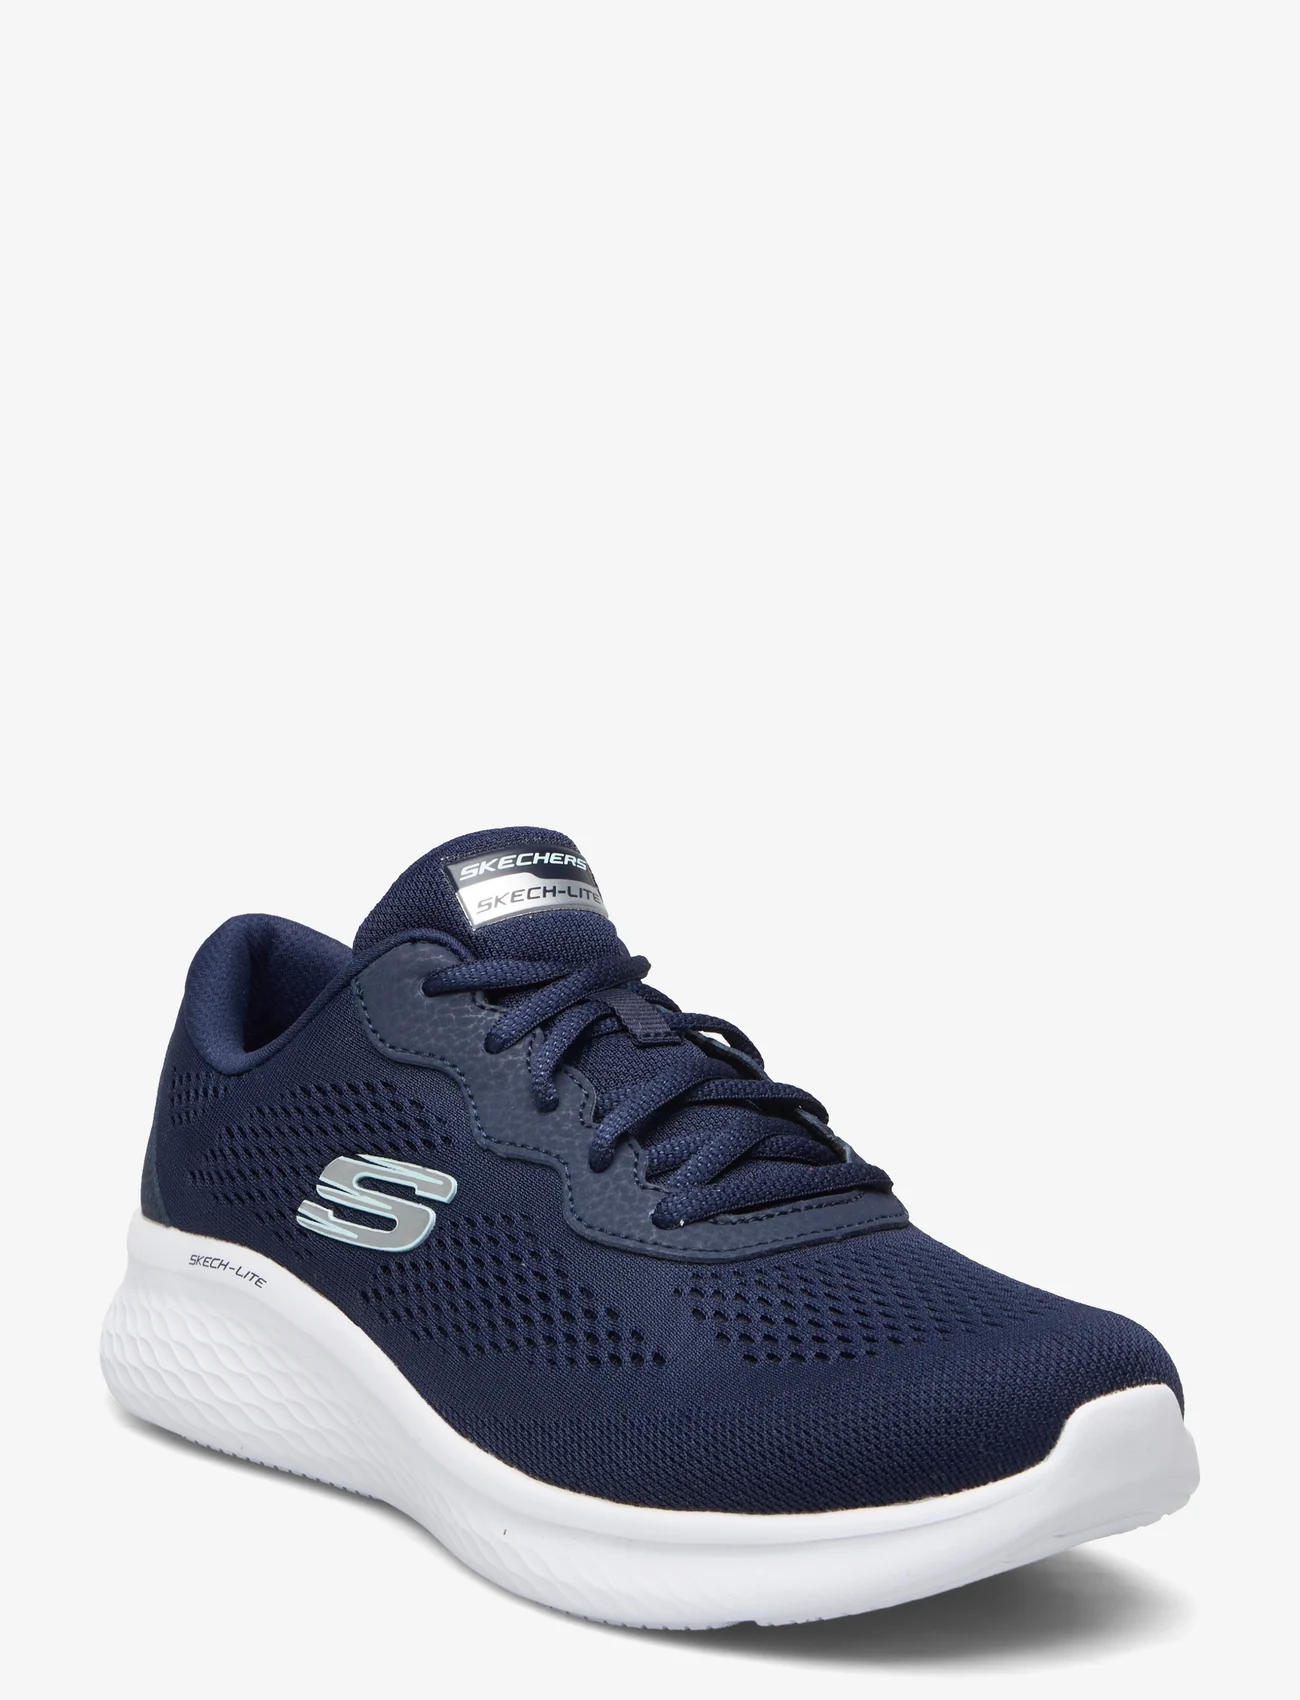 Skechers - Womens Skech-Lite Pro - Perfect Time - lave sneakers - nvy navy - 0